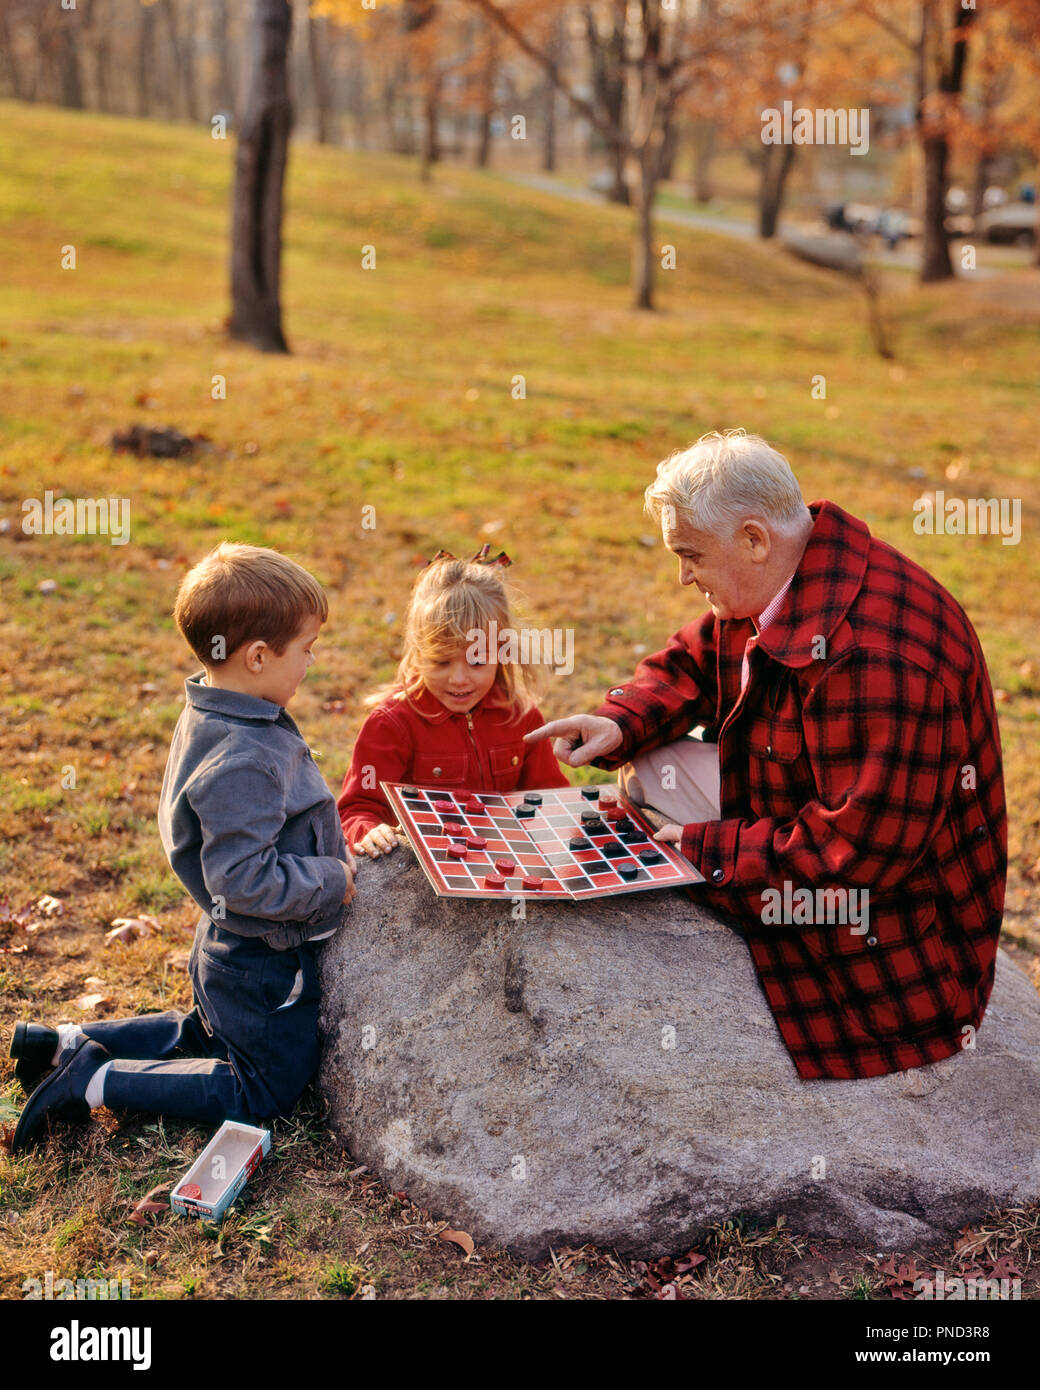 1970s GRANDFATHER PLAYING CHECKERS WITH GRANDSON AND GRANDDAUGHTER AUTUMN PARK - kj5111 PHT001 HARS OLD FASHION SISTER 1 JUVENILE BLOND TEAMWORK COMPETITION GRANDFATHER GRANDPARENTS JOY LIFESTYLE FEMALES GRANDPARENT BROTHERS RURAL HOME LIFE WOOL COPY SPACE FULL-LENGTH INSPIRATION CARING MALES SIBLINGS CONFIDENCE SENIOR MAN SISTERS SENIOR ADULT CHECKERS MIDDLE-AGED MIDDLE-AGED MAN HAPPINESS LEISURE AND CHOICE EXCITEMENT KNOWLEDGE RECREATION AUTHORITY SIBLING CONNECTION GRANDDAUGHTER GRANDFATHERS GRANDSON CHECKERBOARD GRAY JUVENILES RELAXATION TOGETHERNESS WOODLAND CAUCASIAN ETHNICITY GRANDPA Stock Photo